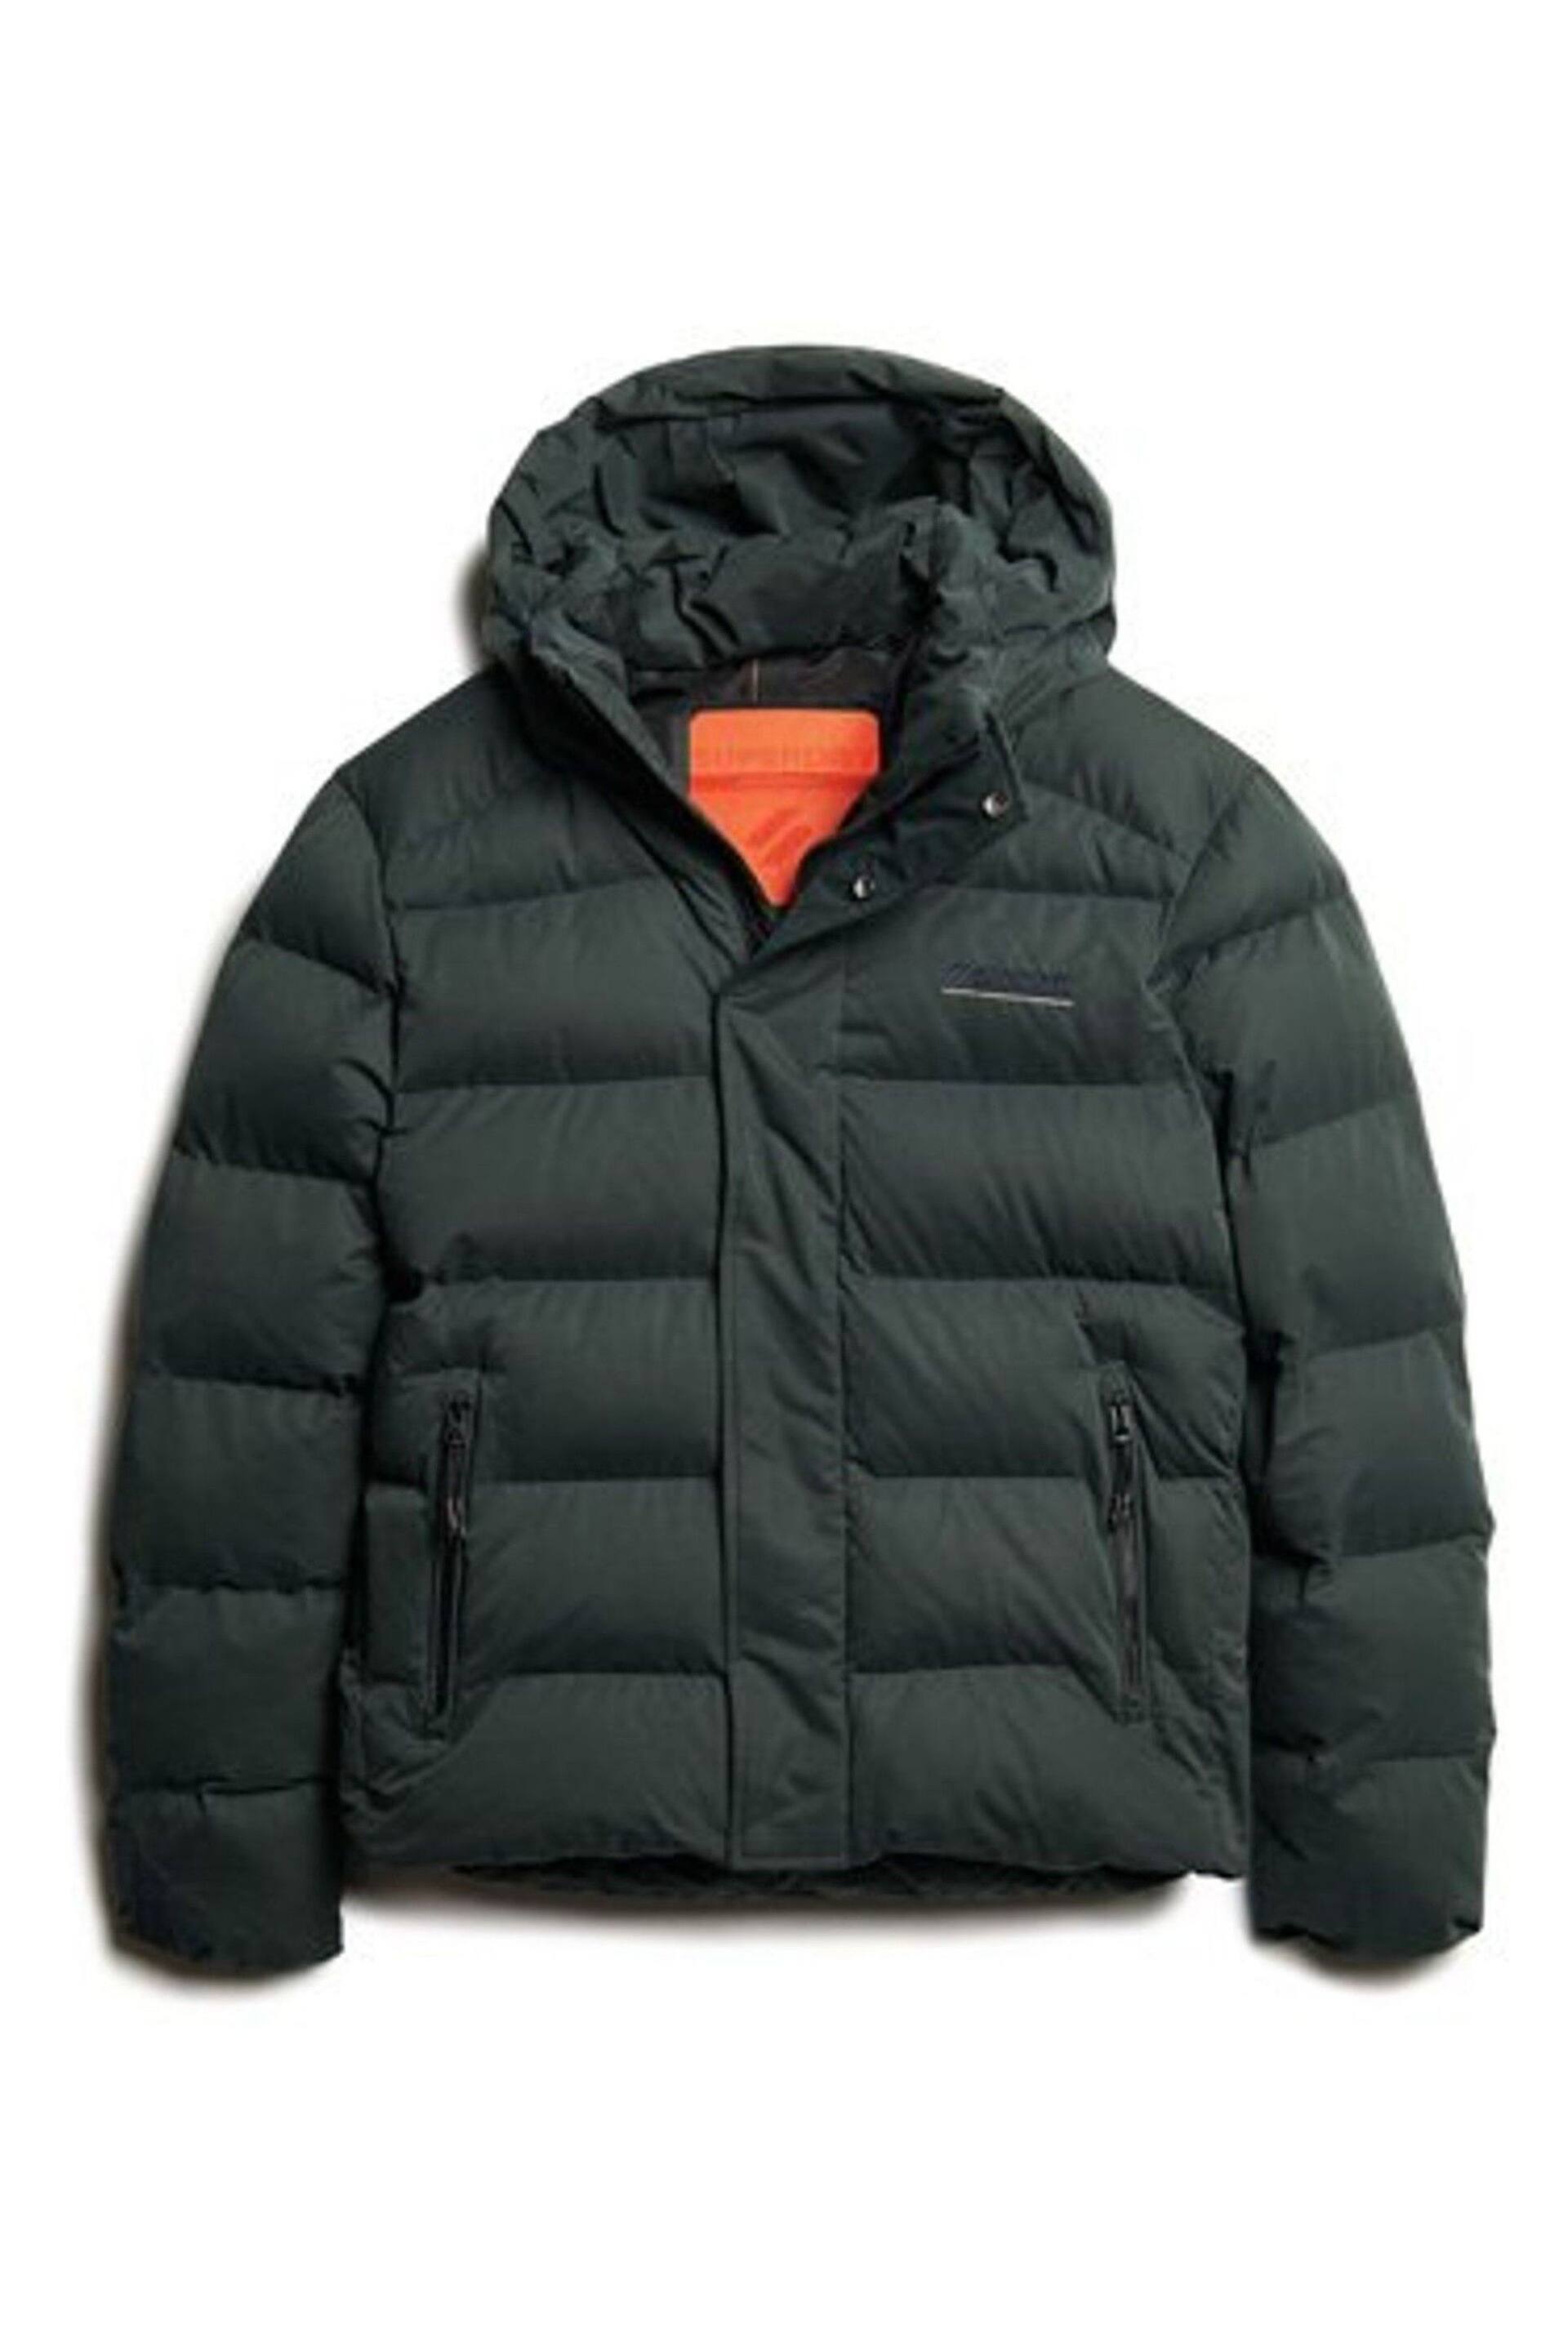 Superdry Green Hooded Microfibre Sports Puffer Jacket - Image 4 of 6